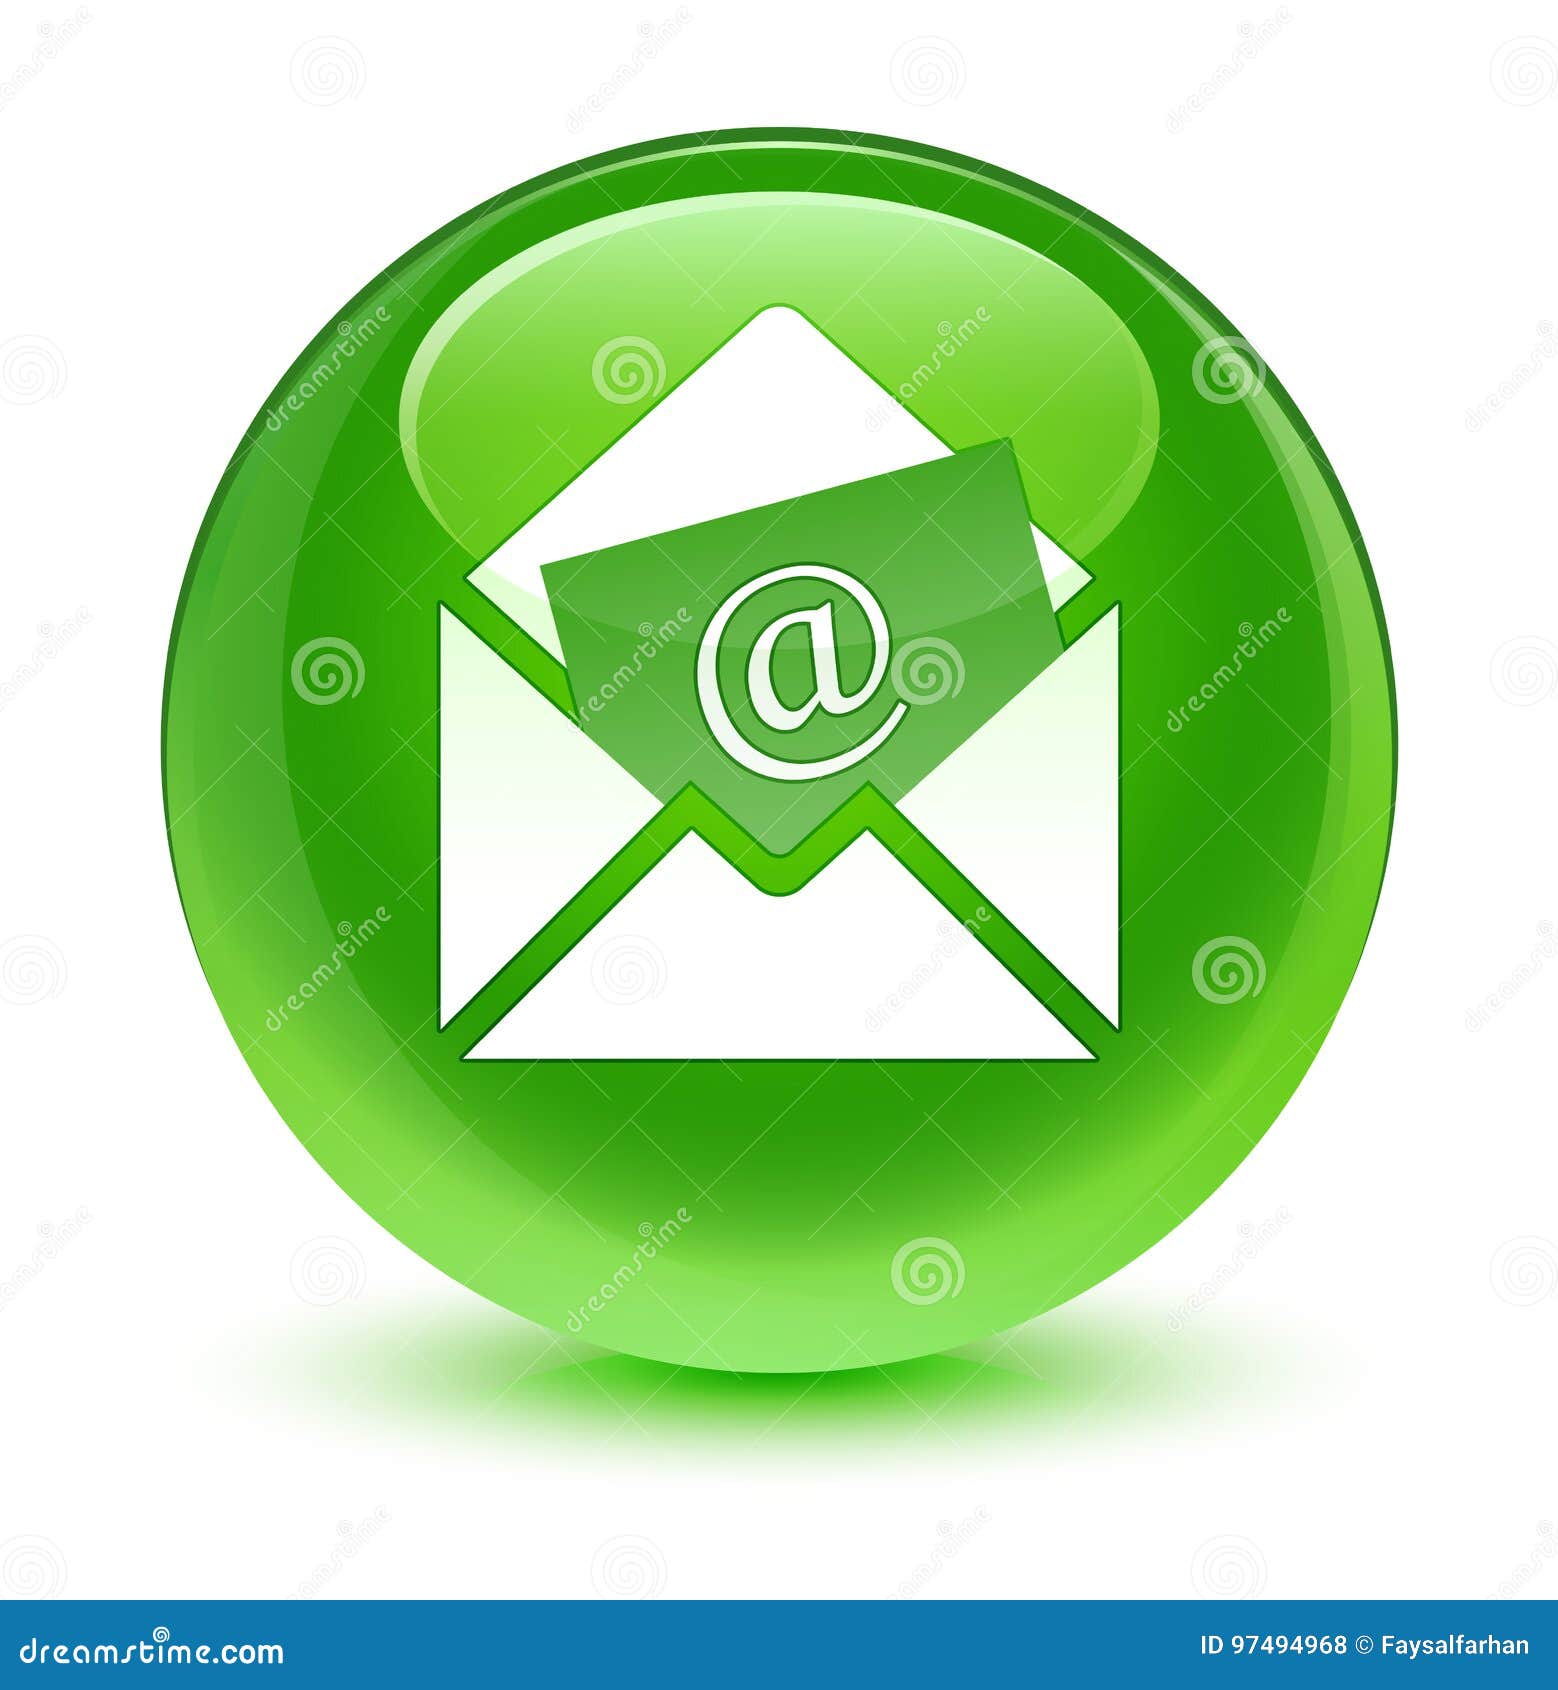 Newsletter Email Icon Glassy Green Round Button Stock Illustration Illustration Of Glassy Icon